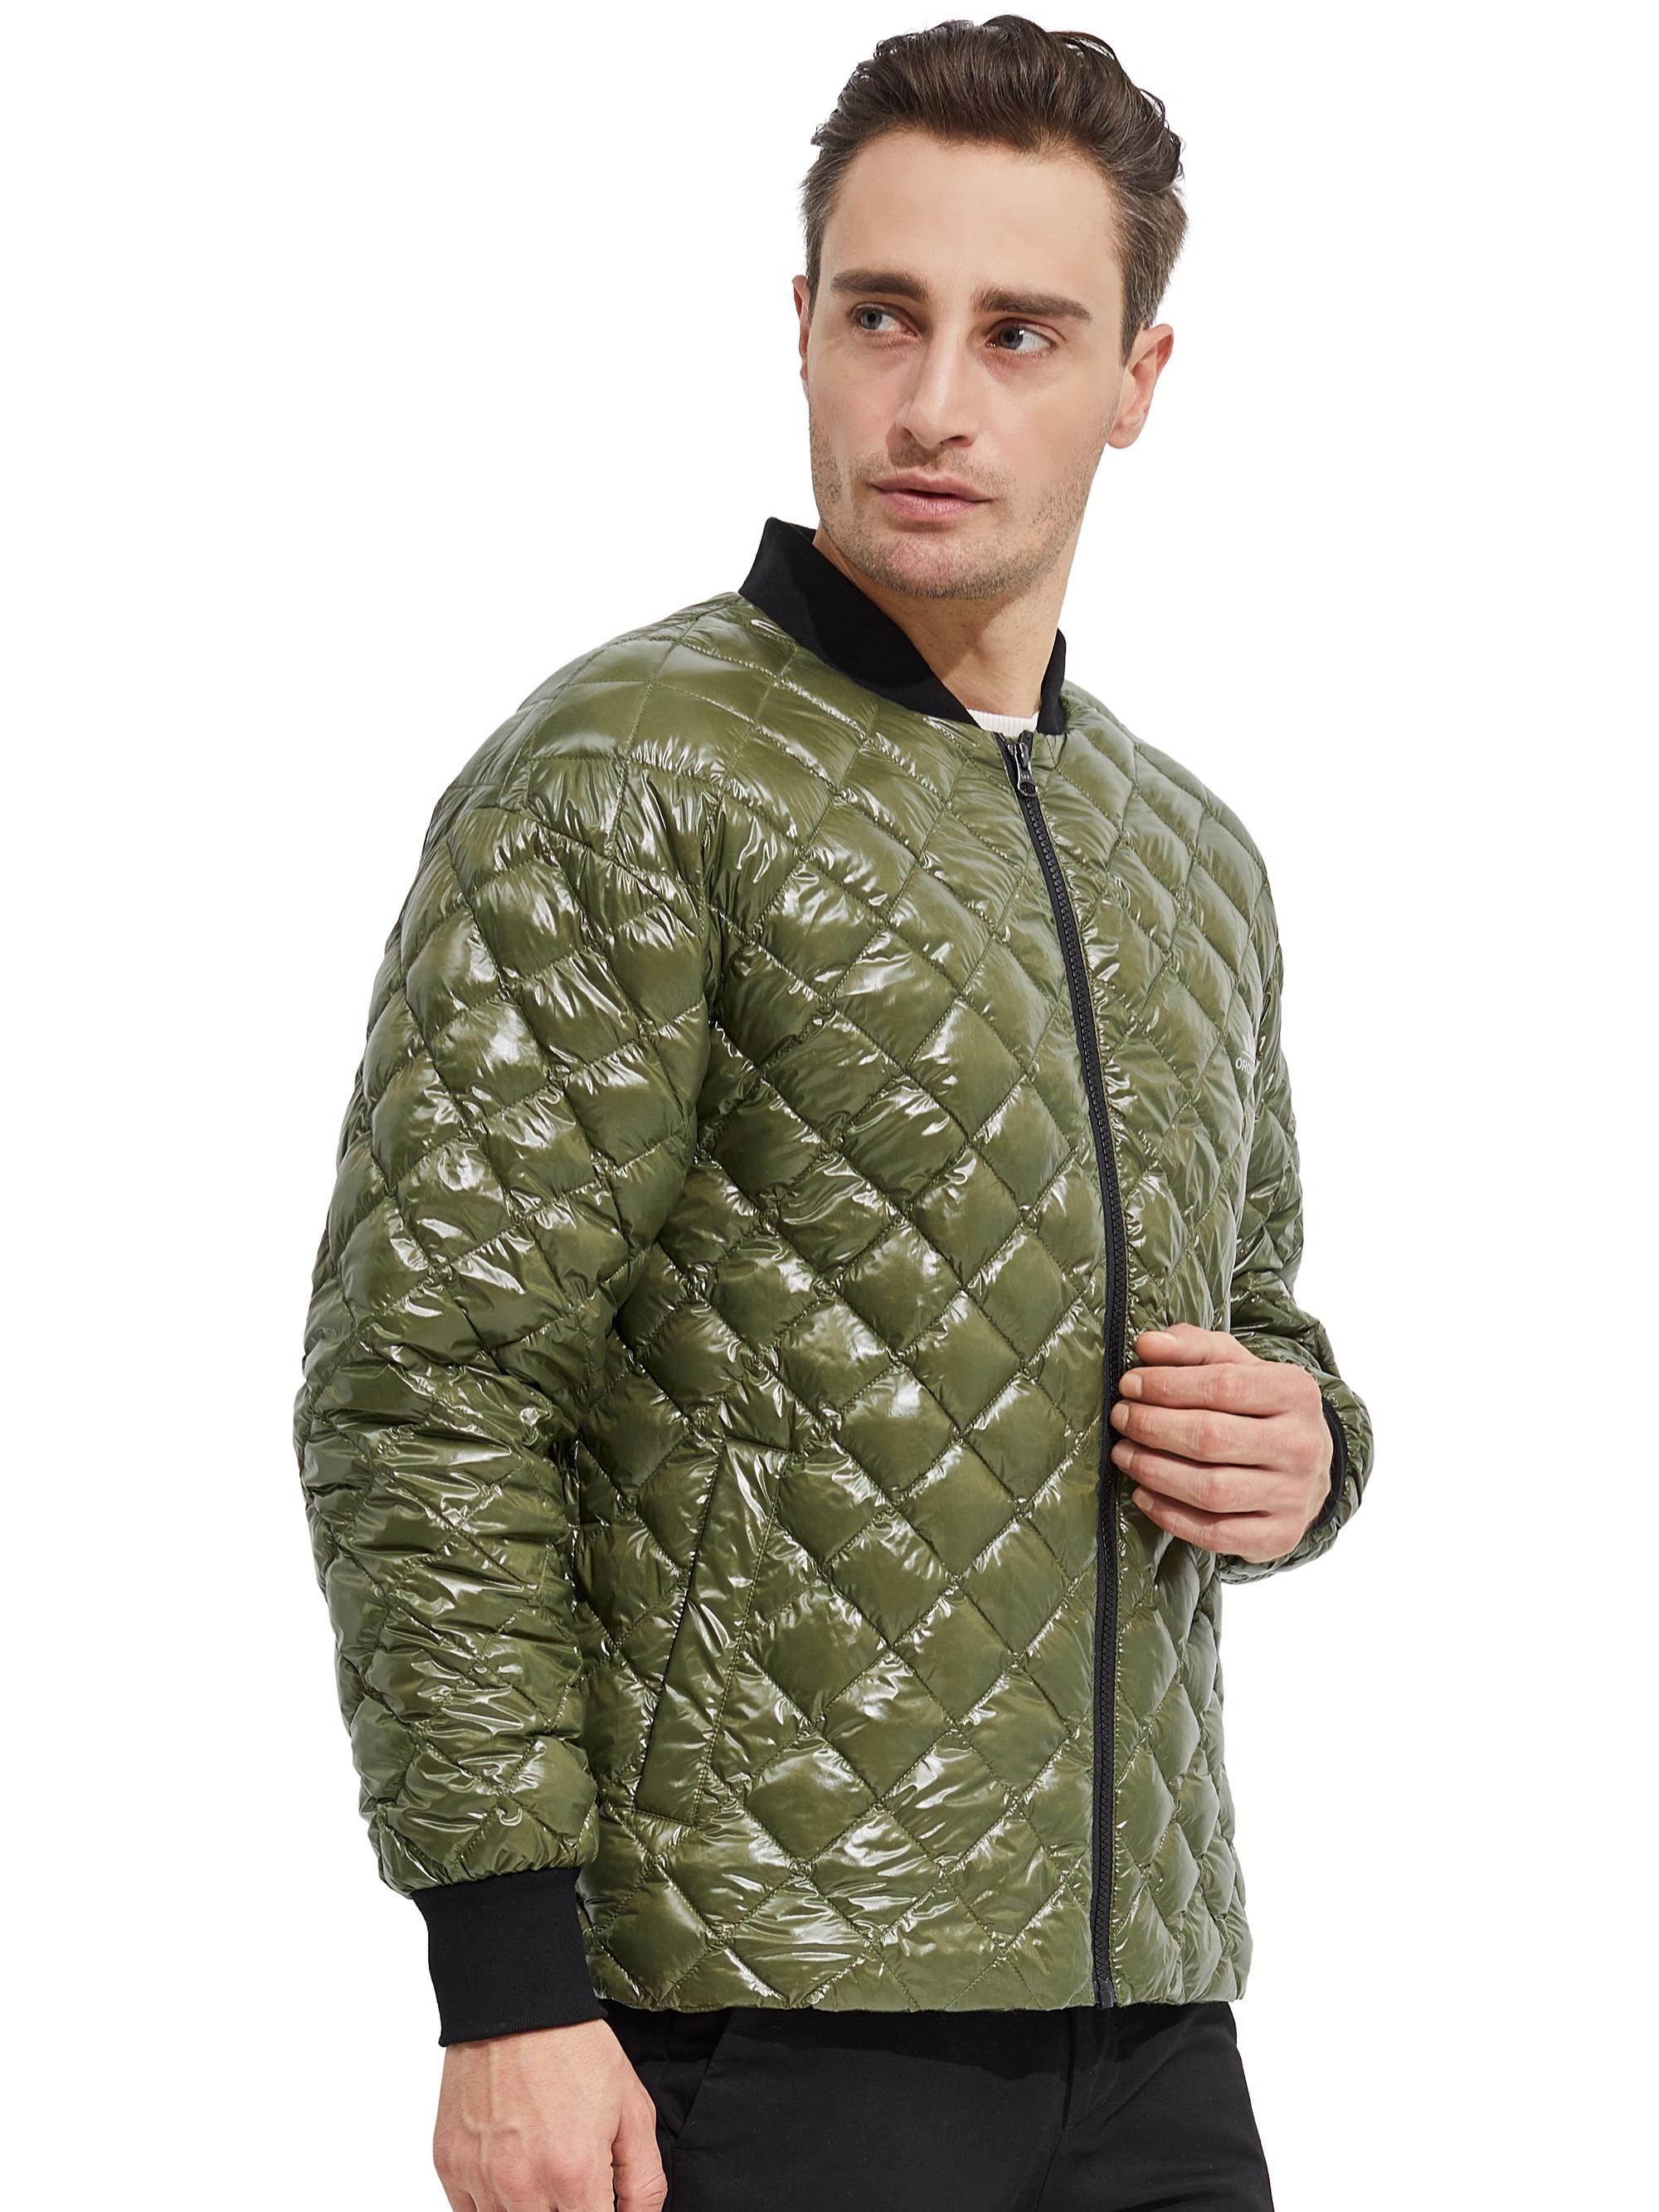 New For 2022 Winter, Men's Solid Zipper Down Jecket | Shop Now For ...